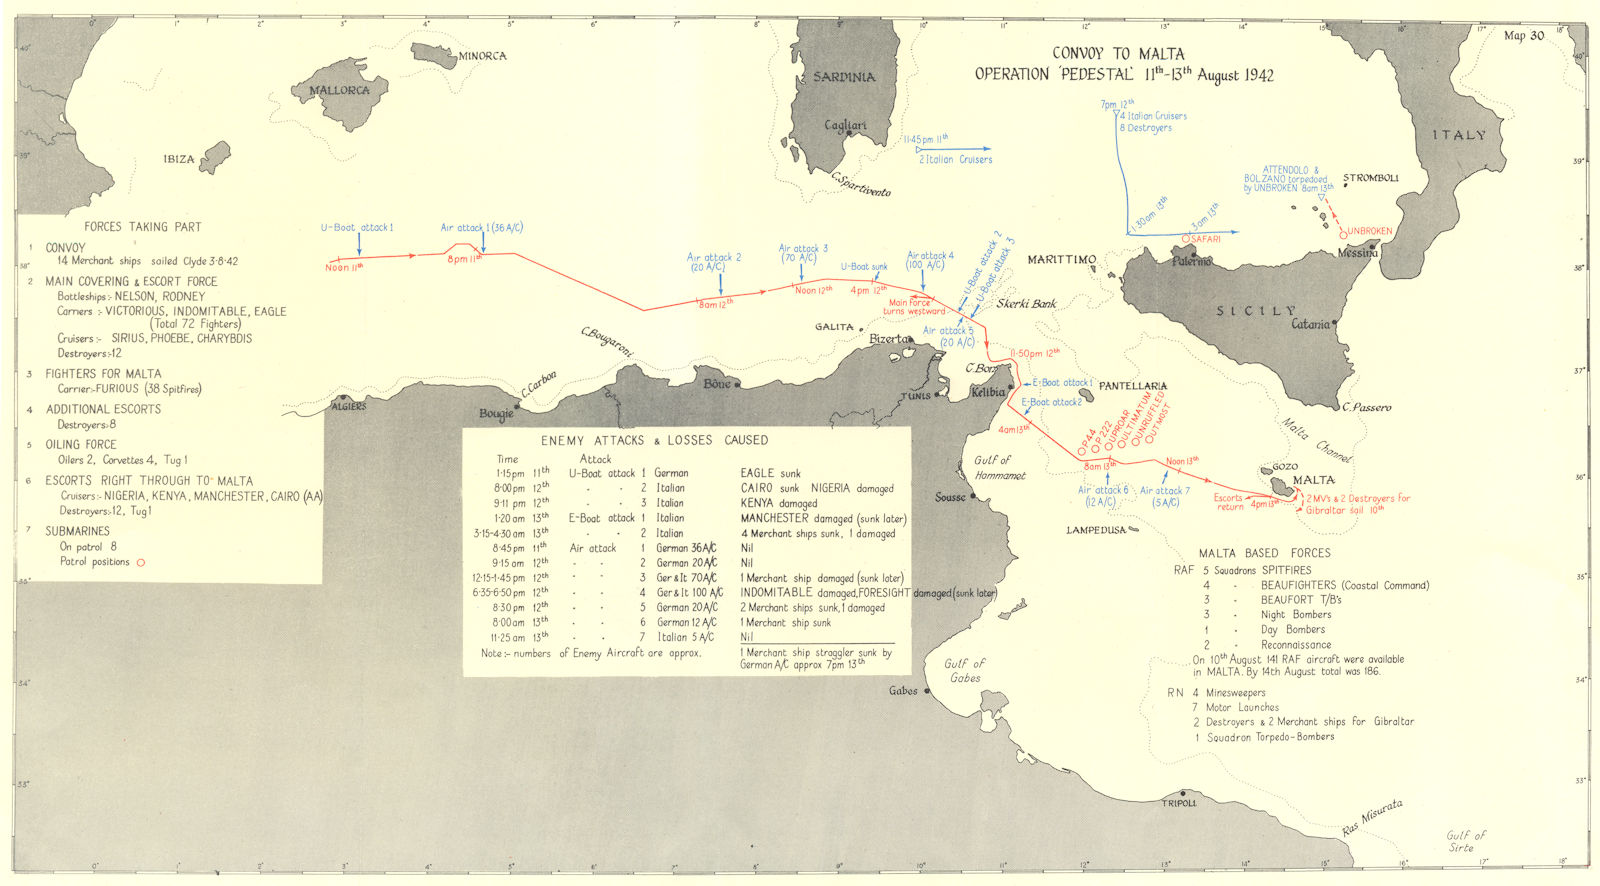 MALTA. Convoy to Operation 'Pedestal' 11th-13th Aug 1942 1956 old vintage map